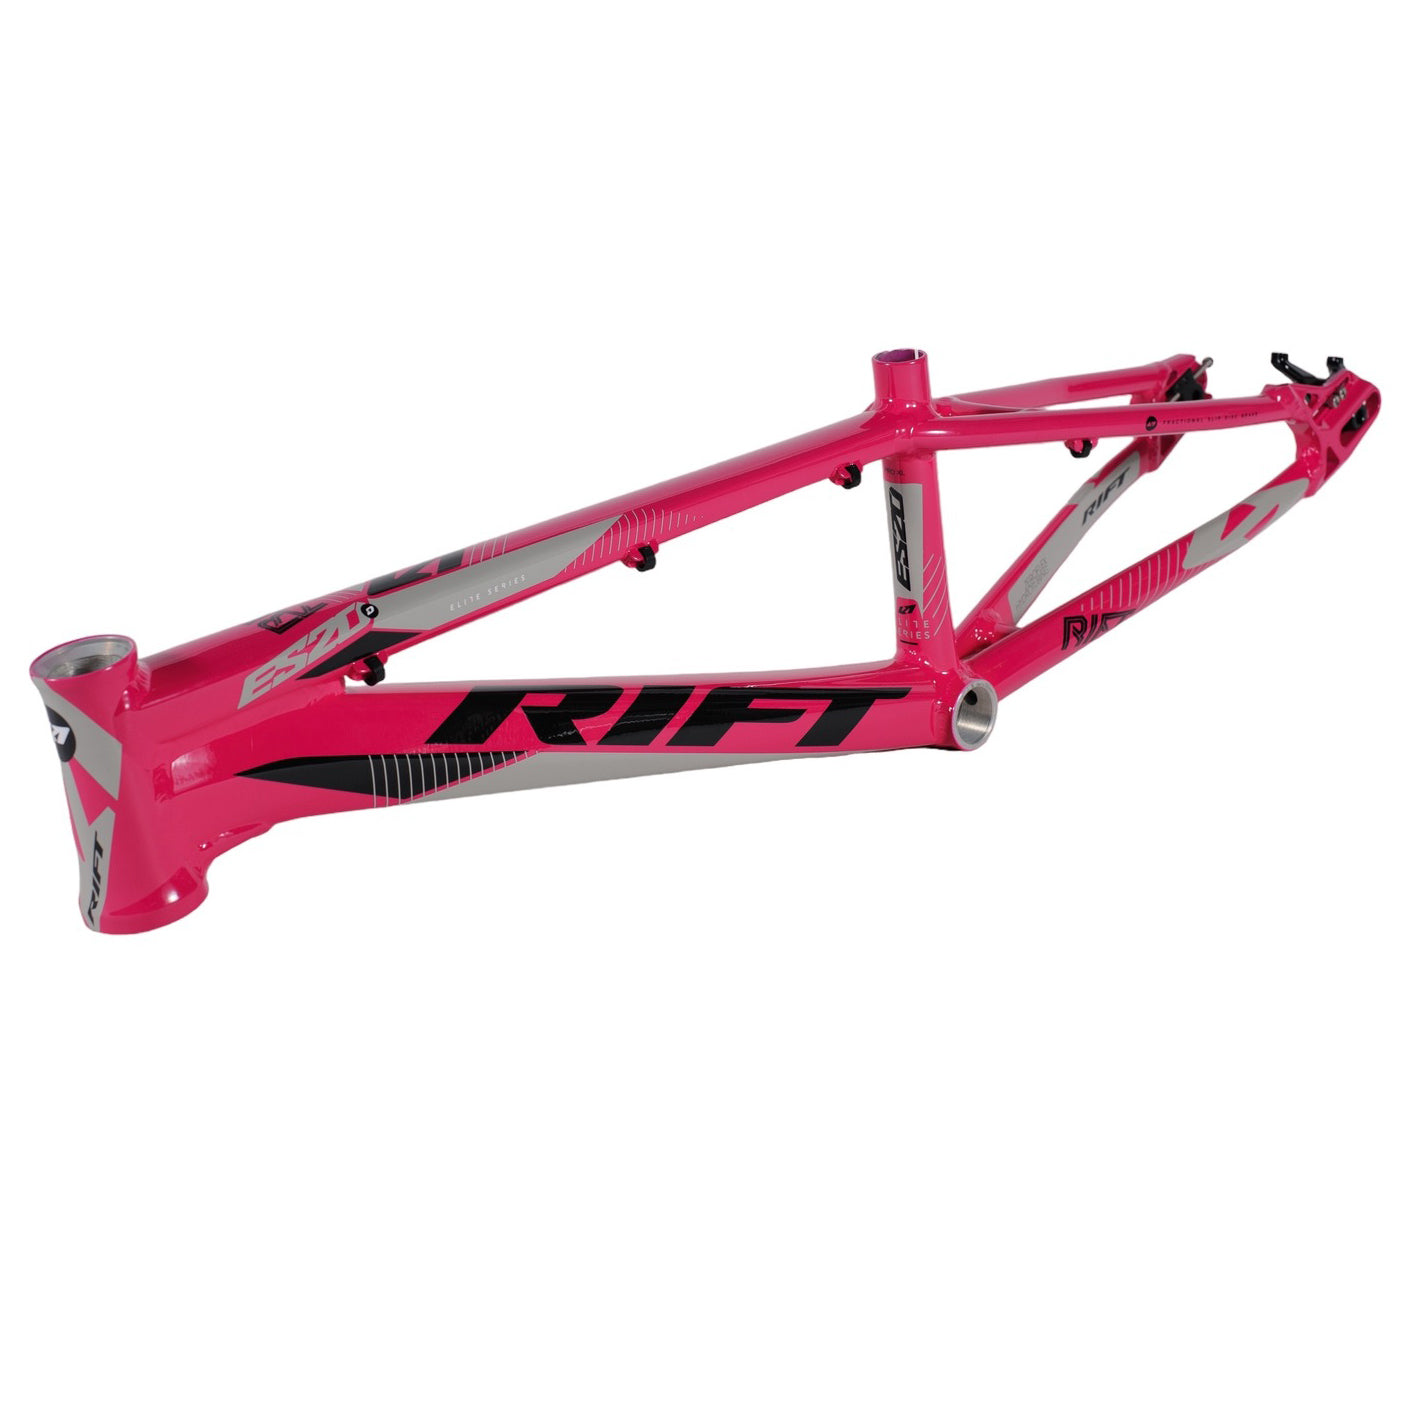 A pink Rift ES24D Frame Pro Cruiser XL frame with disc only on a white background.